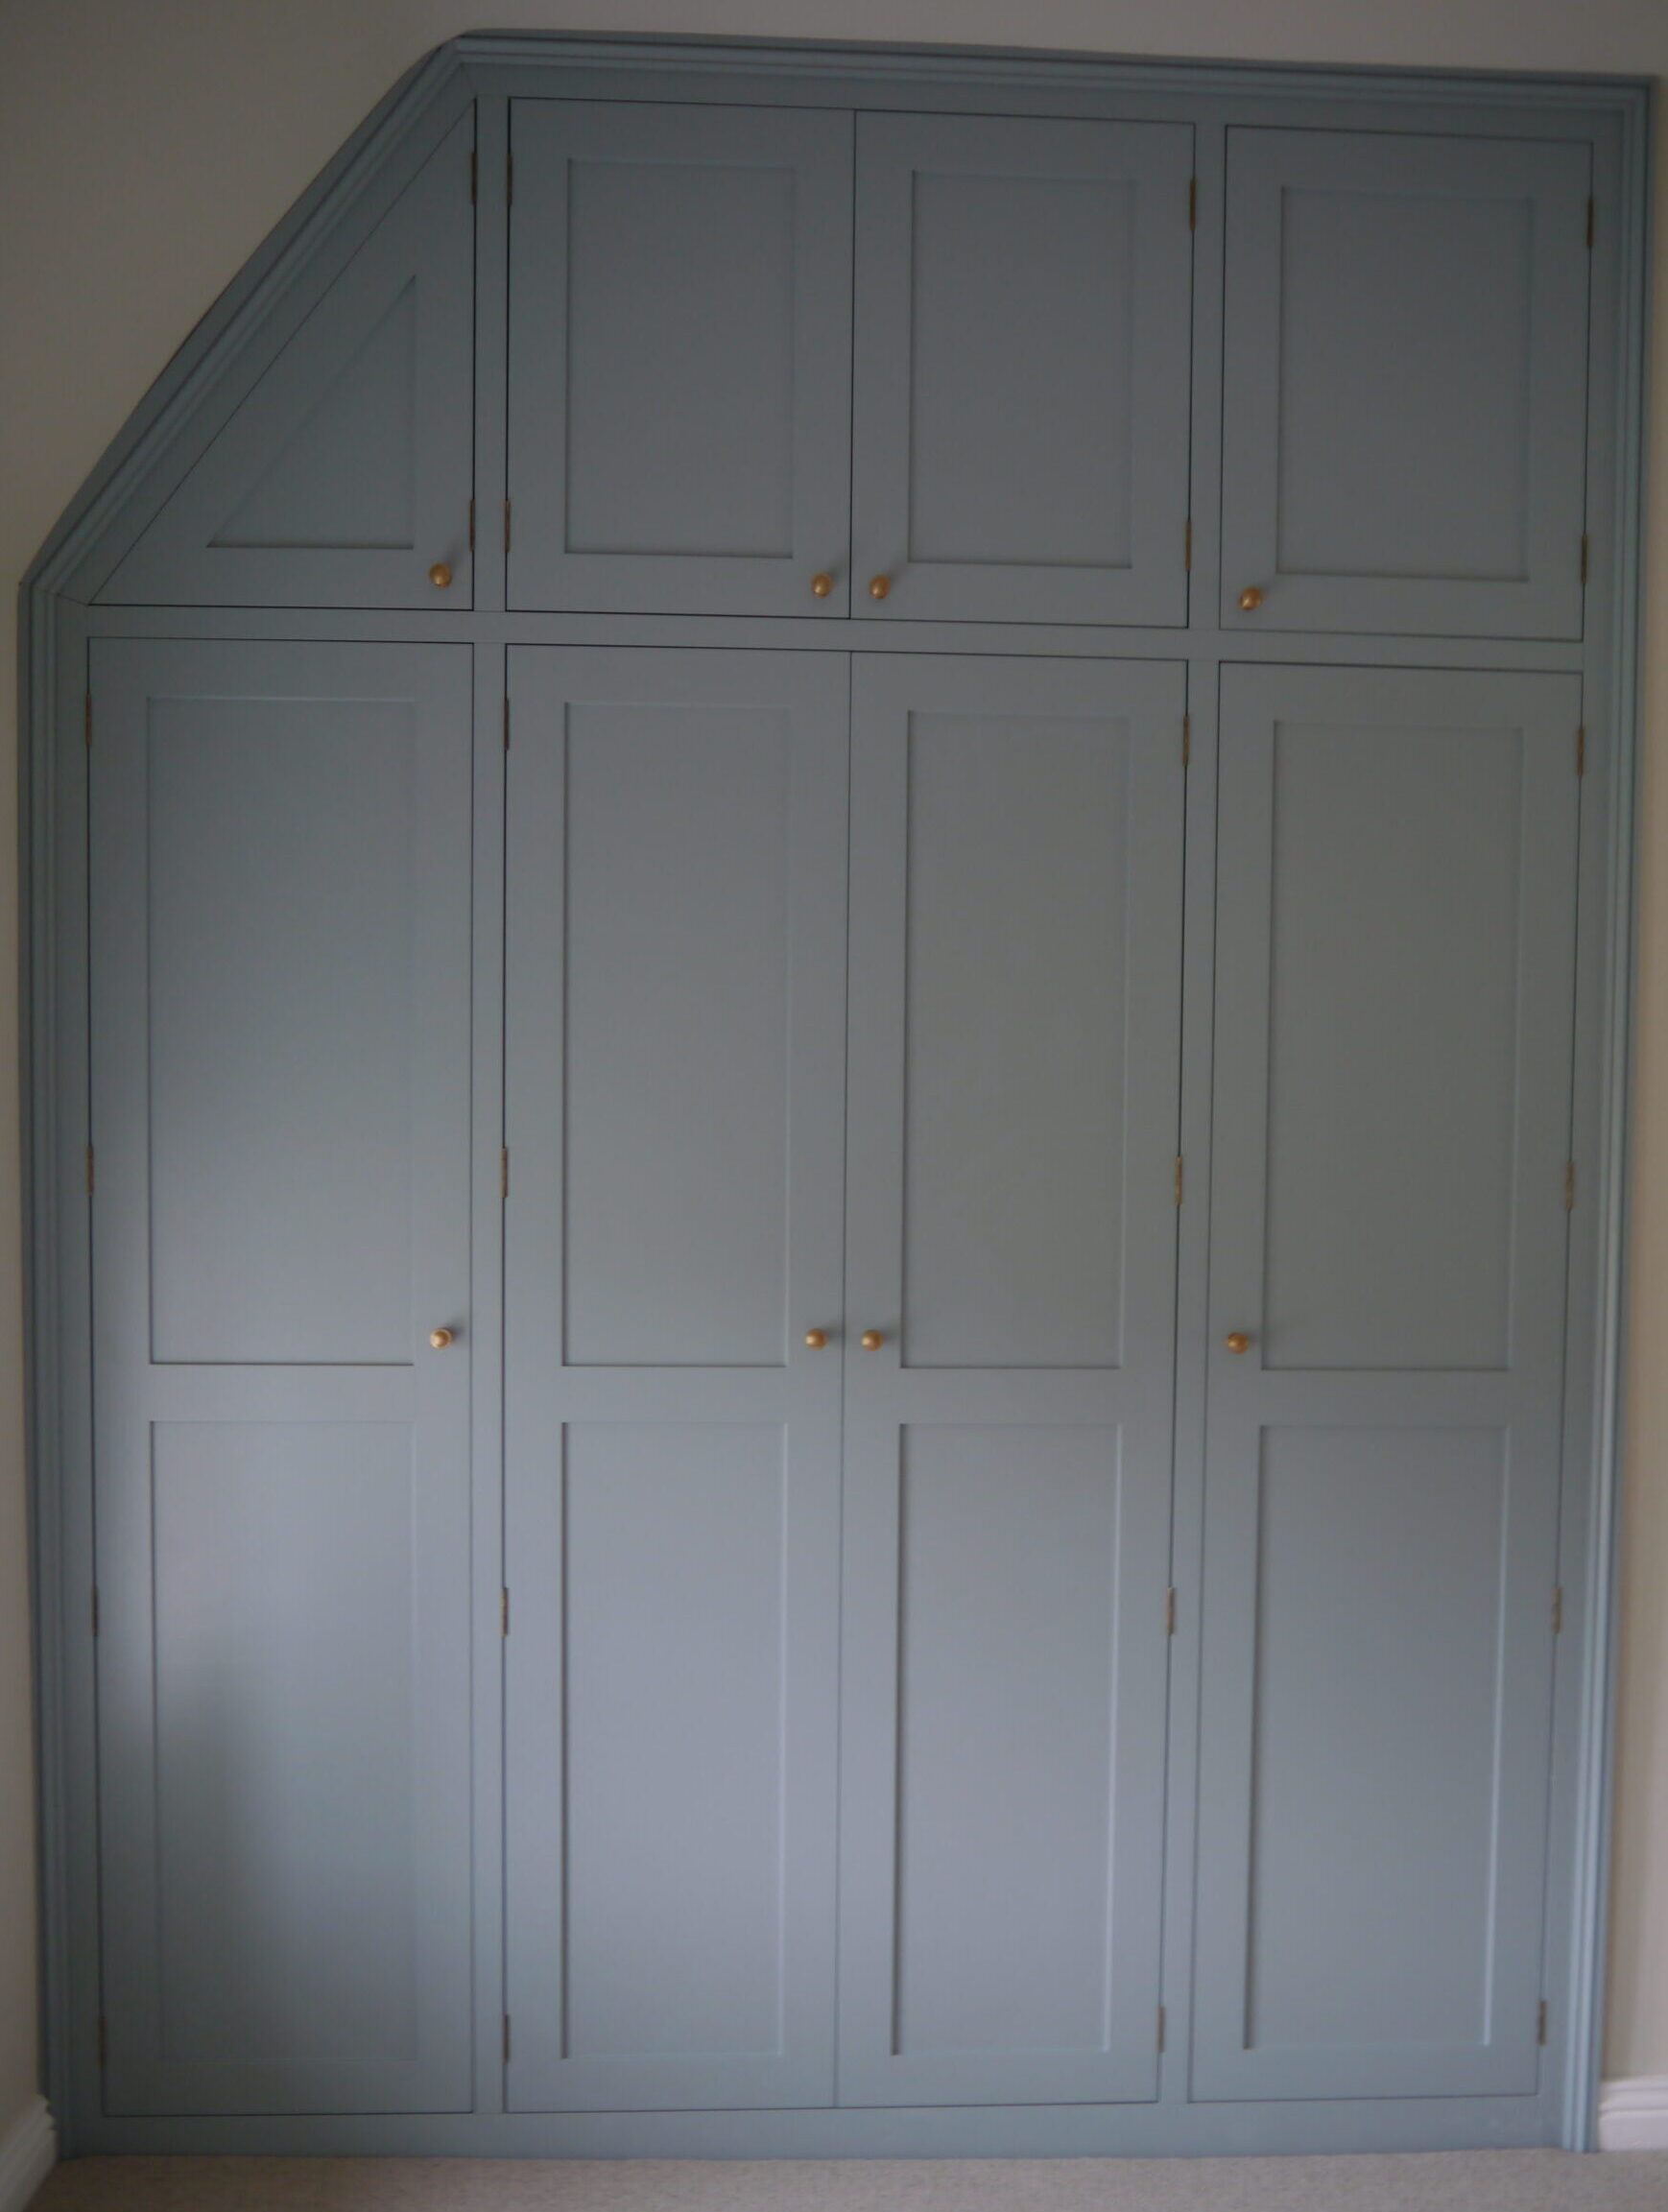 Bespoke timber wardrobe storage by Kings Stag Joinery